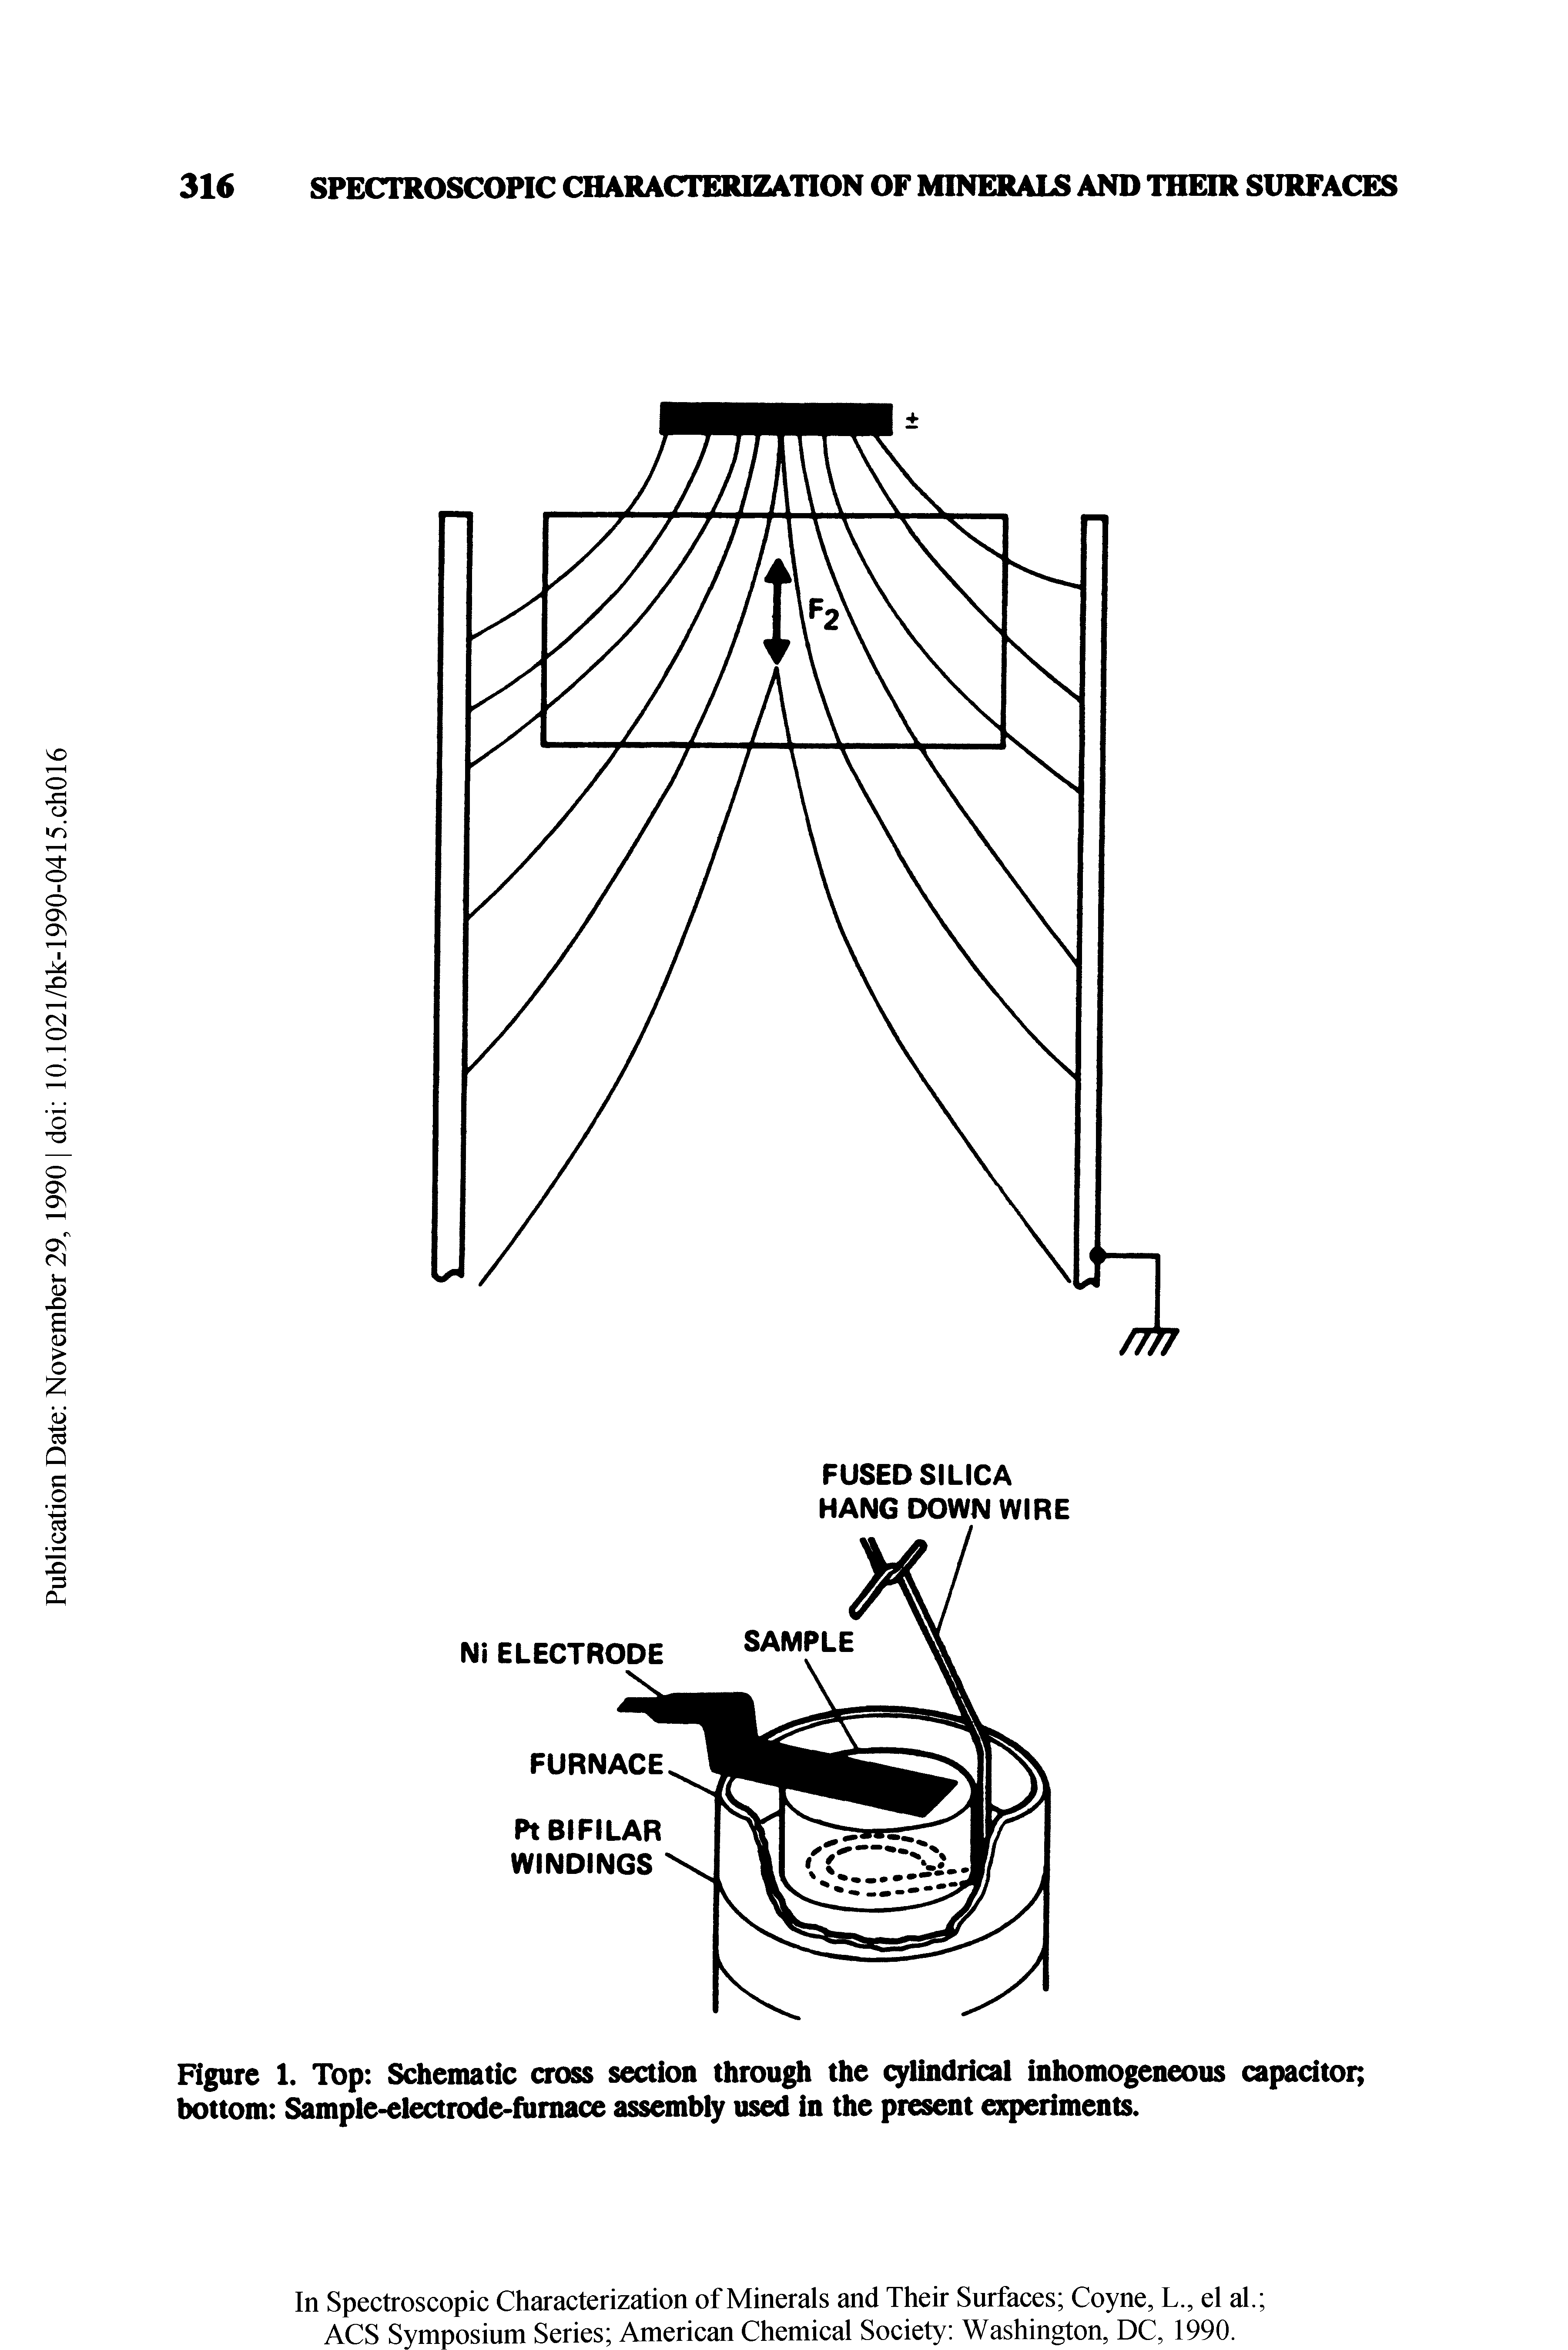 Figure 1. Top Schematic cross section through the cylindrical inhomogeneous capacitor bottom Sample-electrode-fiimace assembly used in the present experiments.